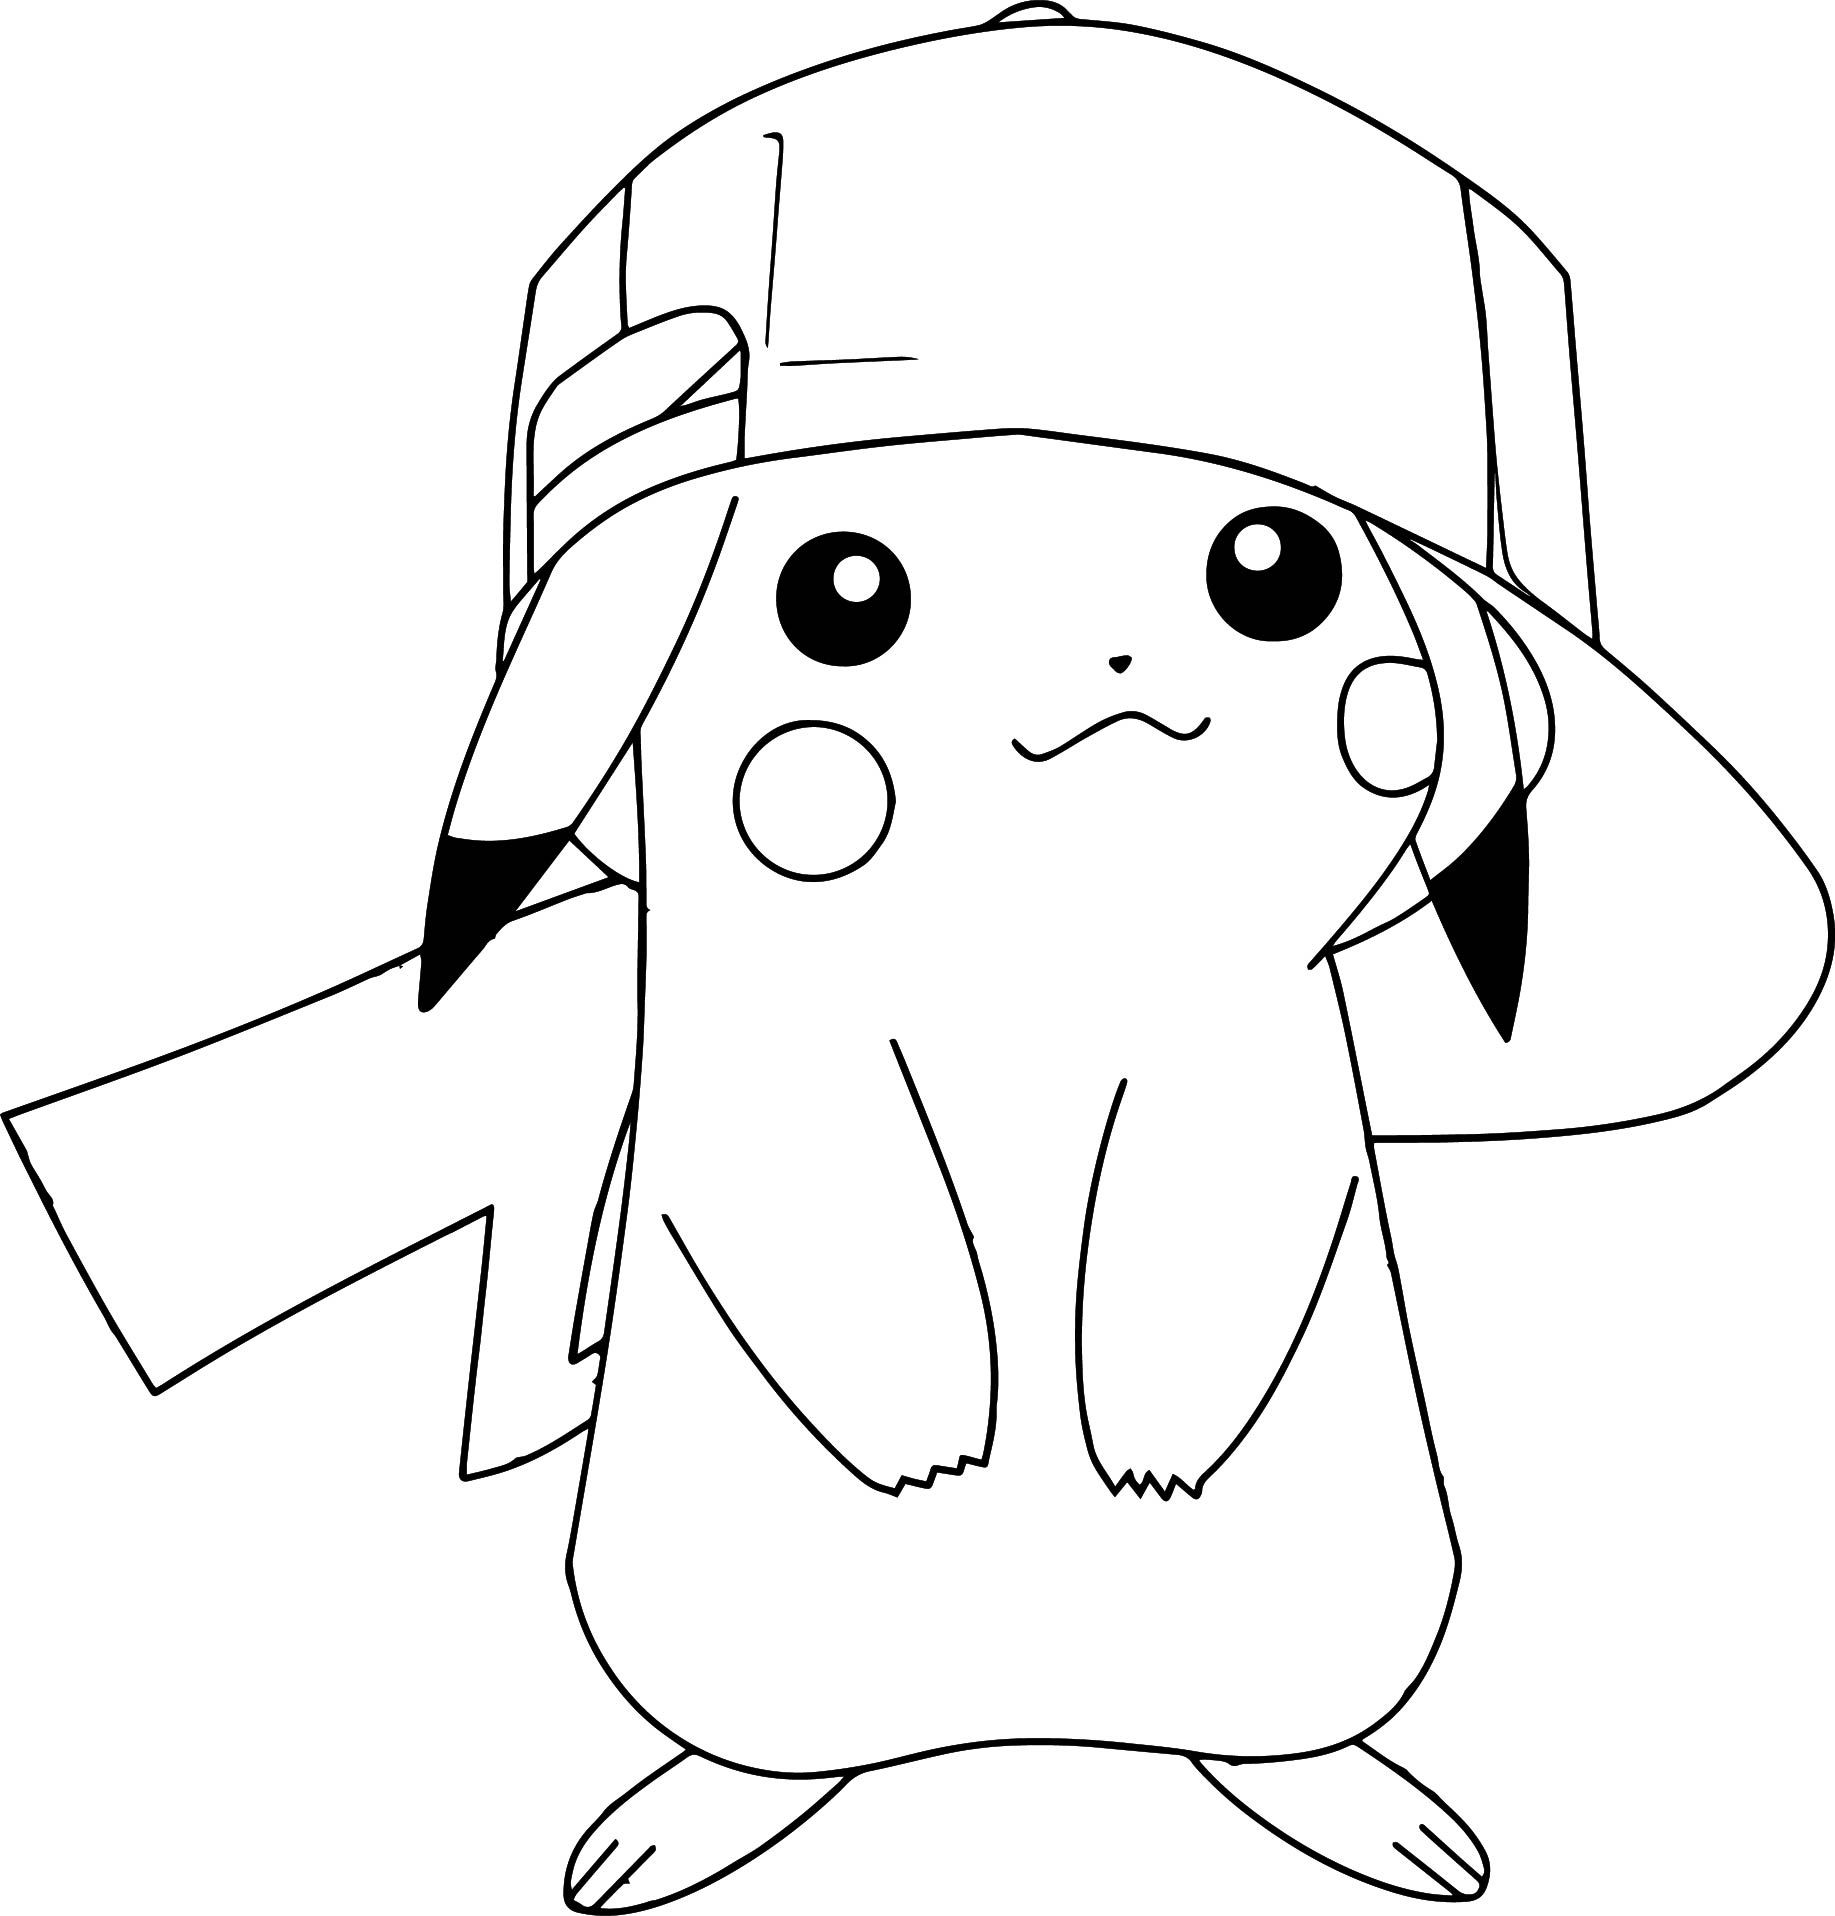 Pikachu Wearing A Hat Coloring Page